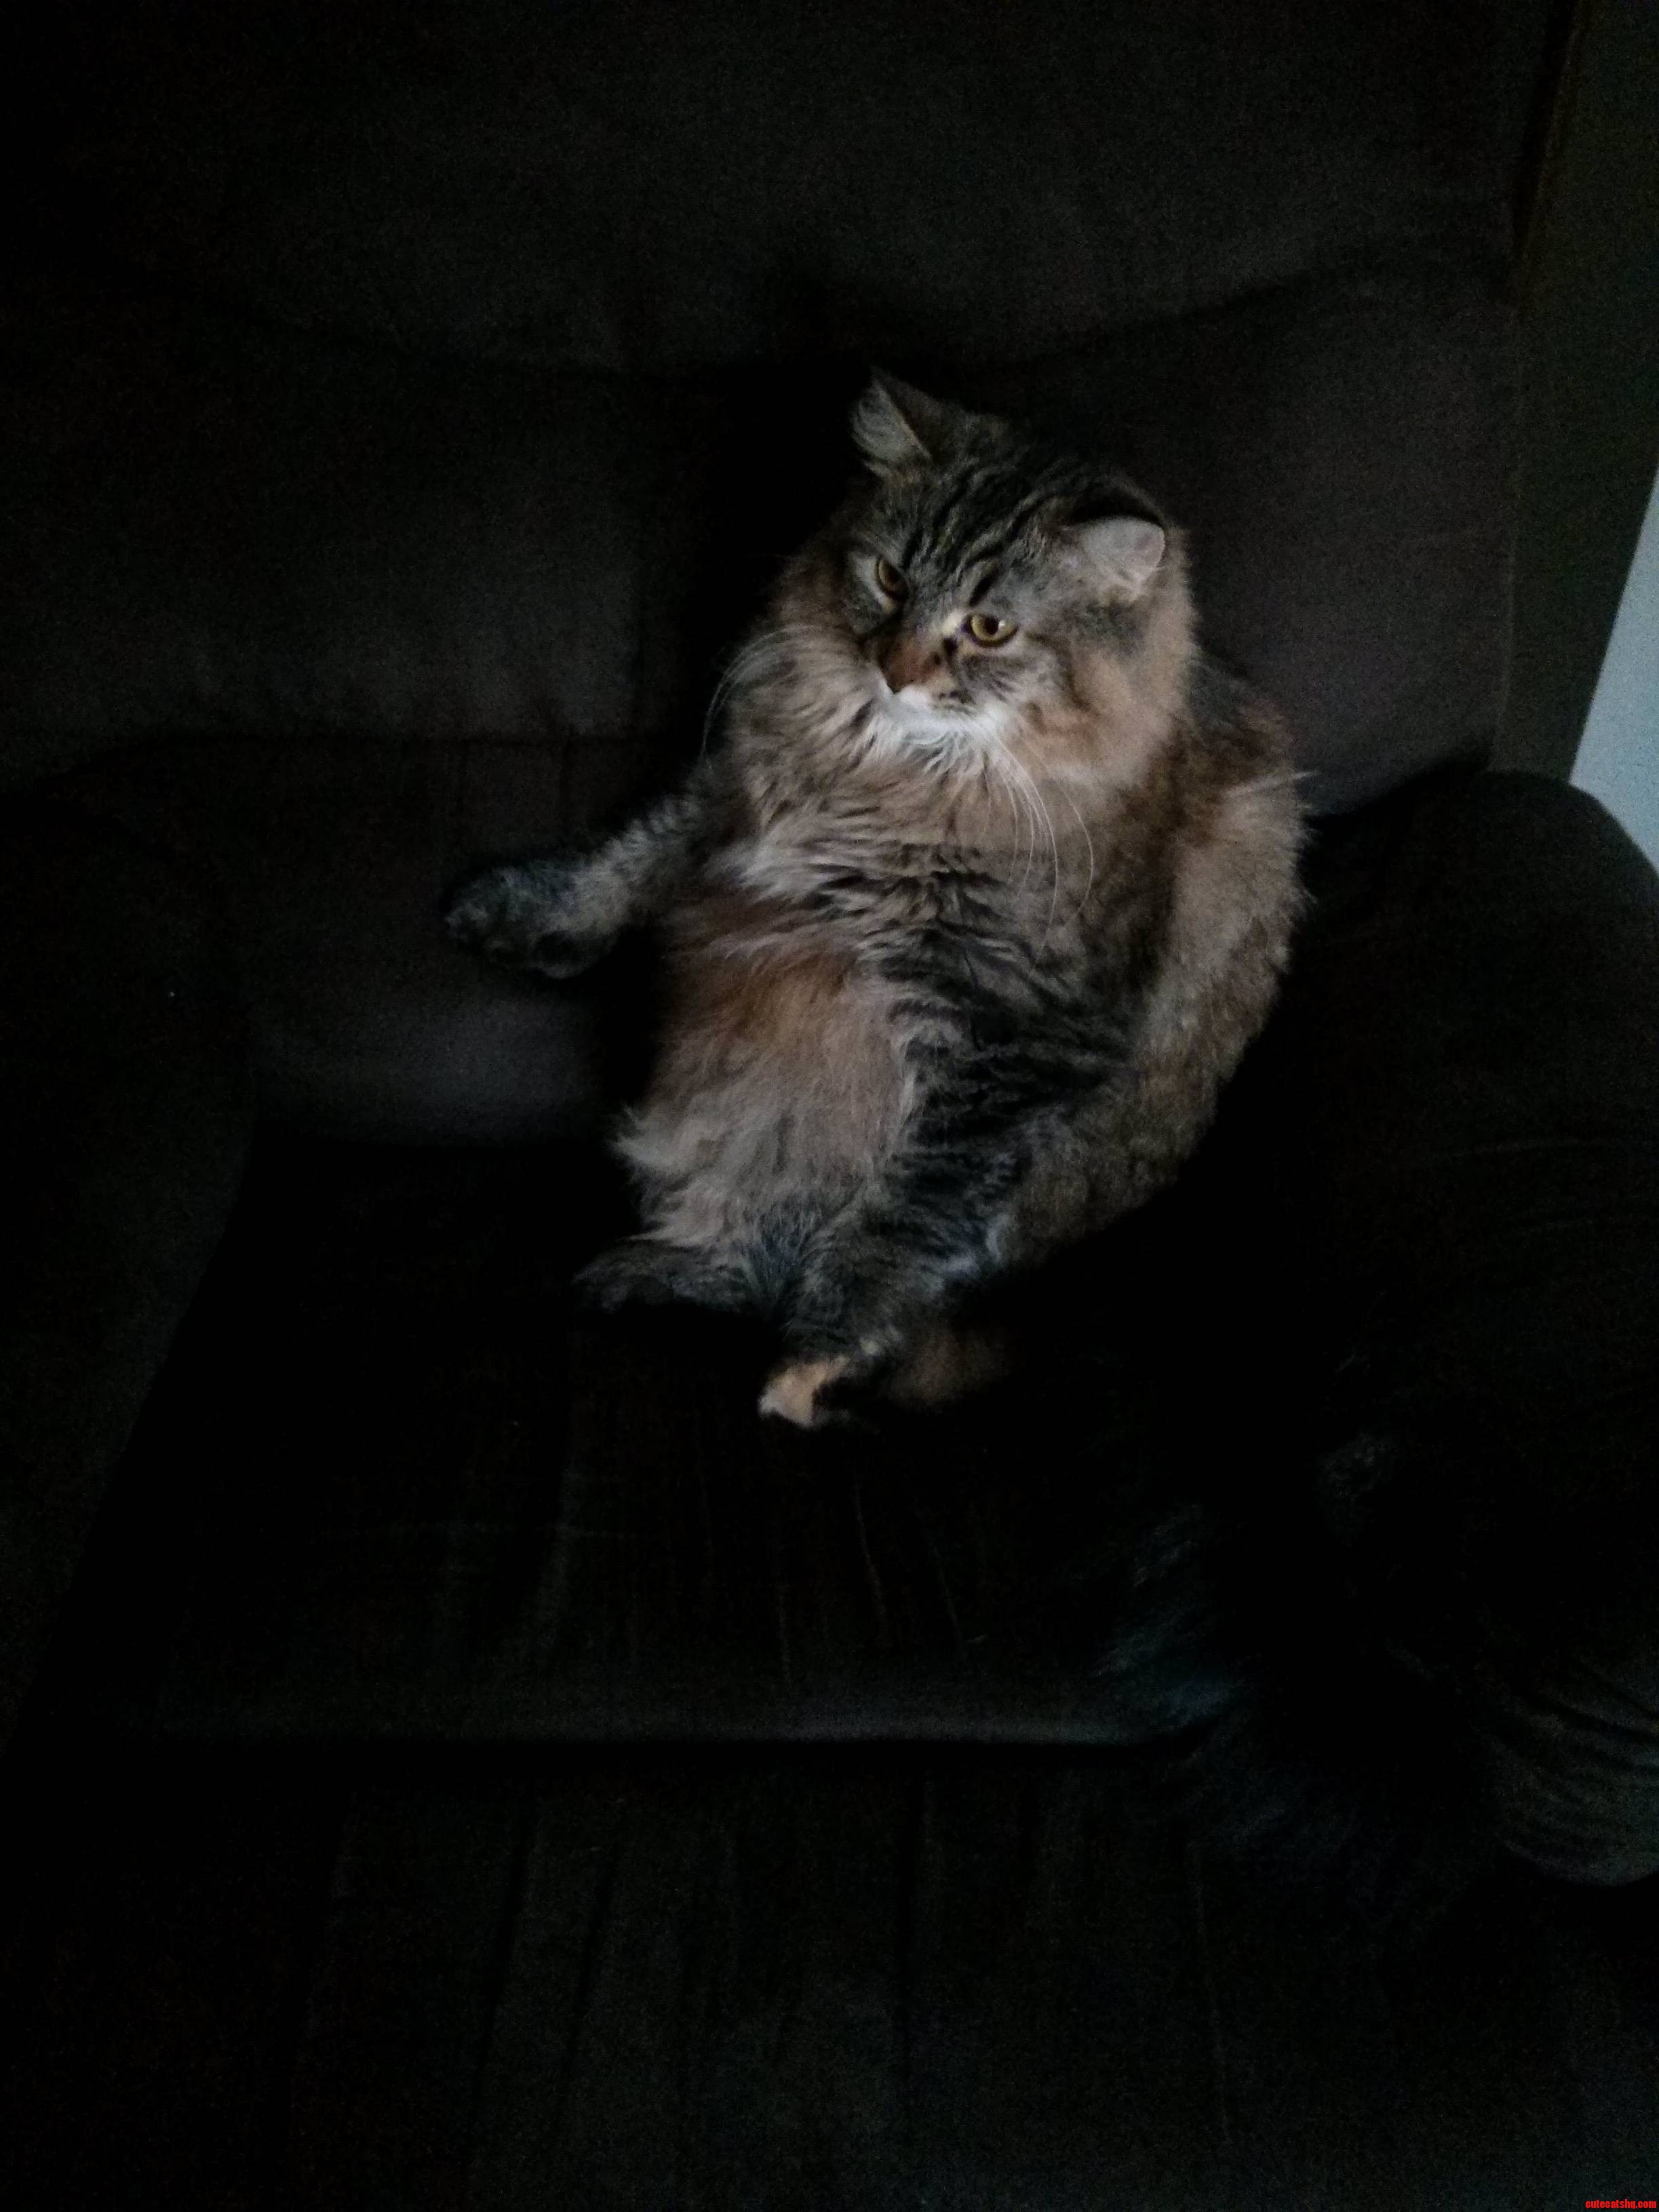 She Is A Fat Ass But She Is So Cute Sitting In Her Chair.